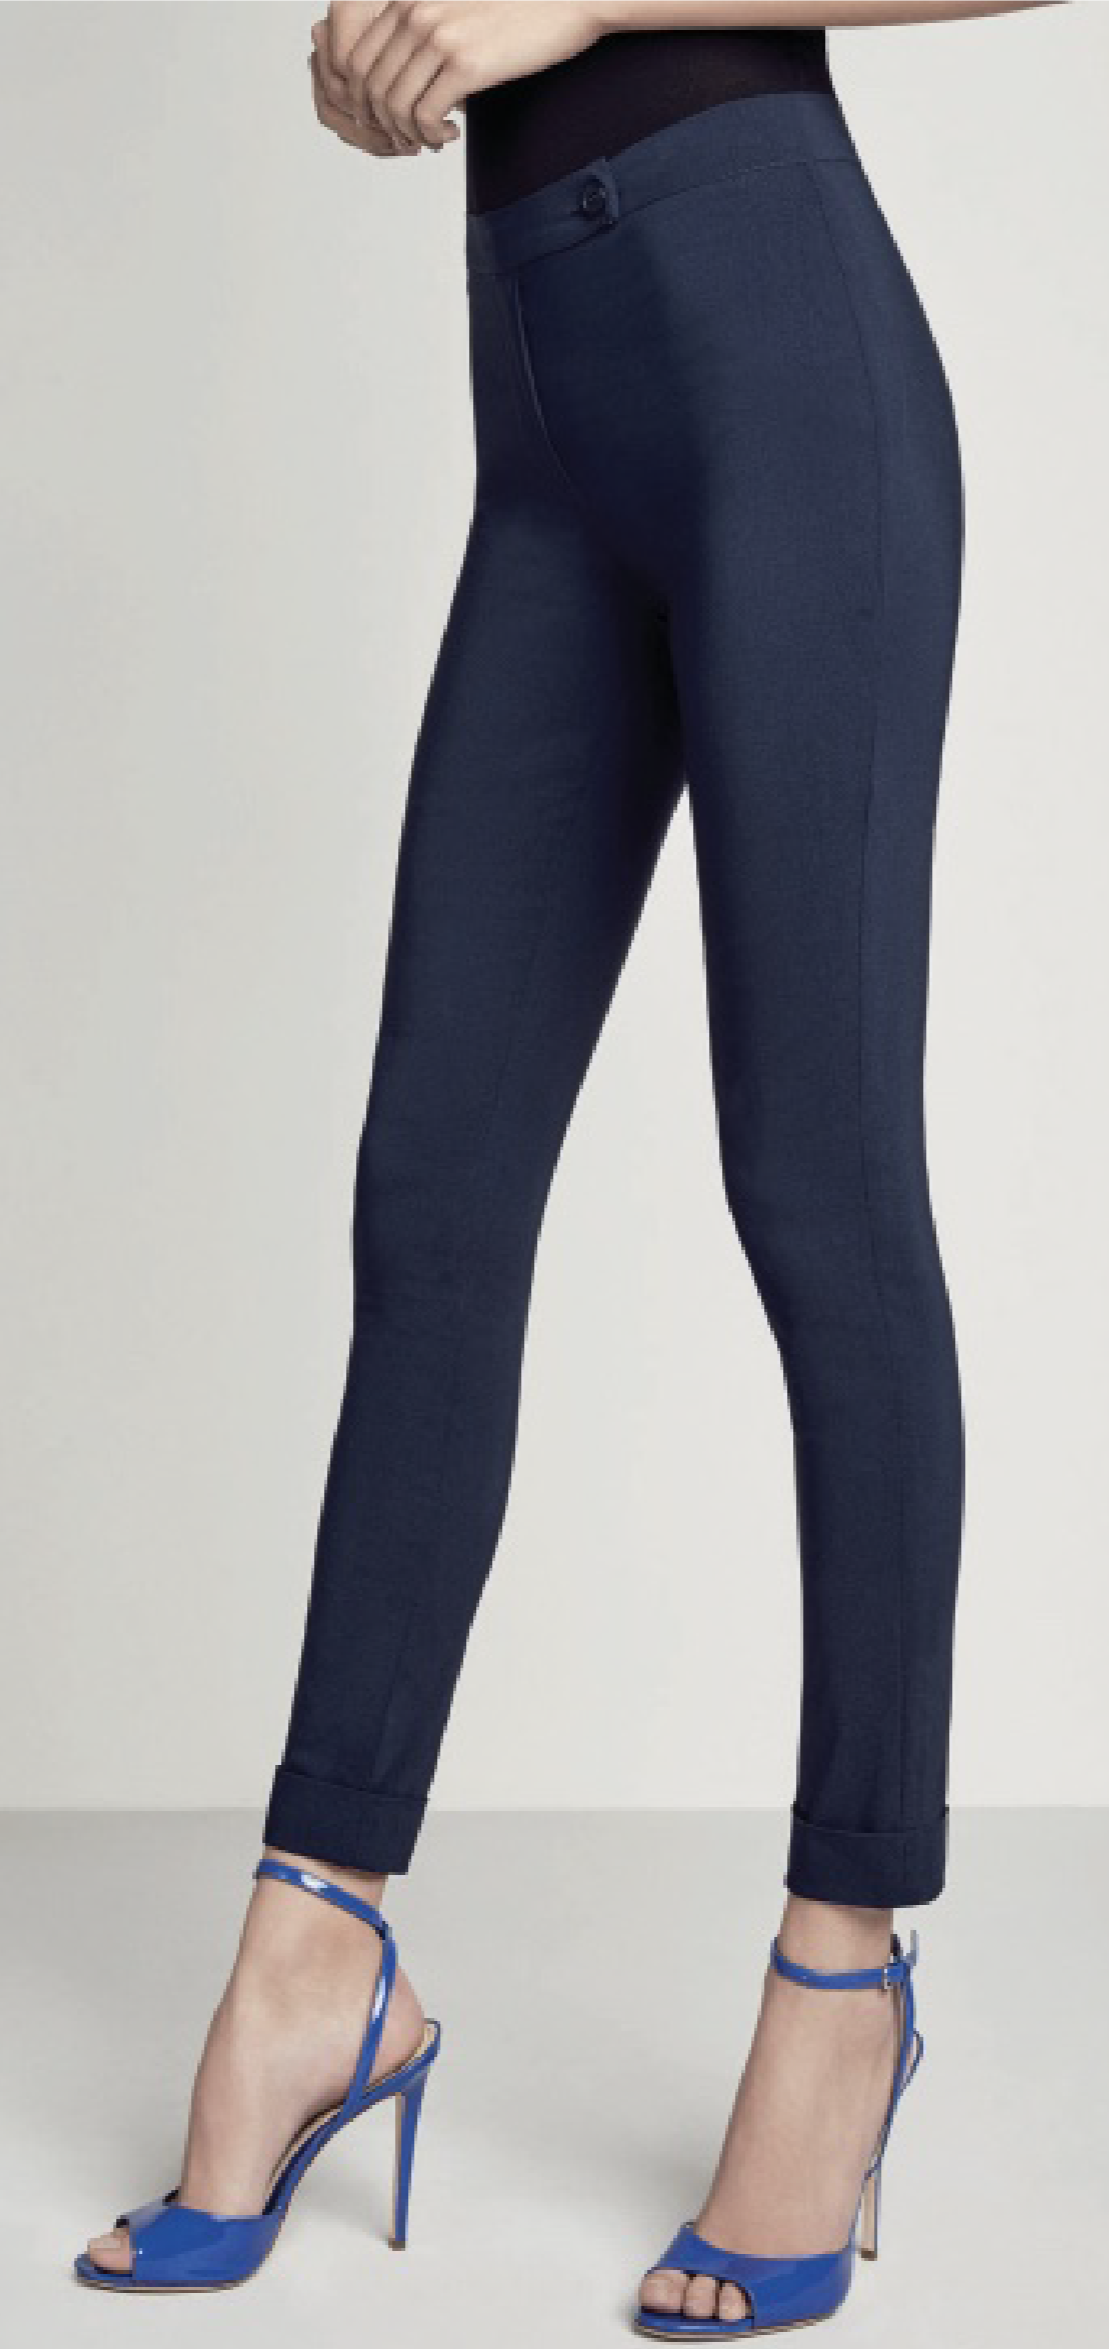 Plain lightweight trouser leggings (treggings) in stretch viscose with front button and zip fastener and turn up cuffs. Available in black and navy.